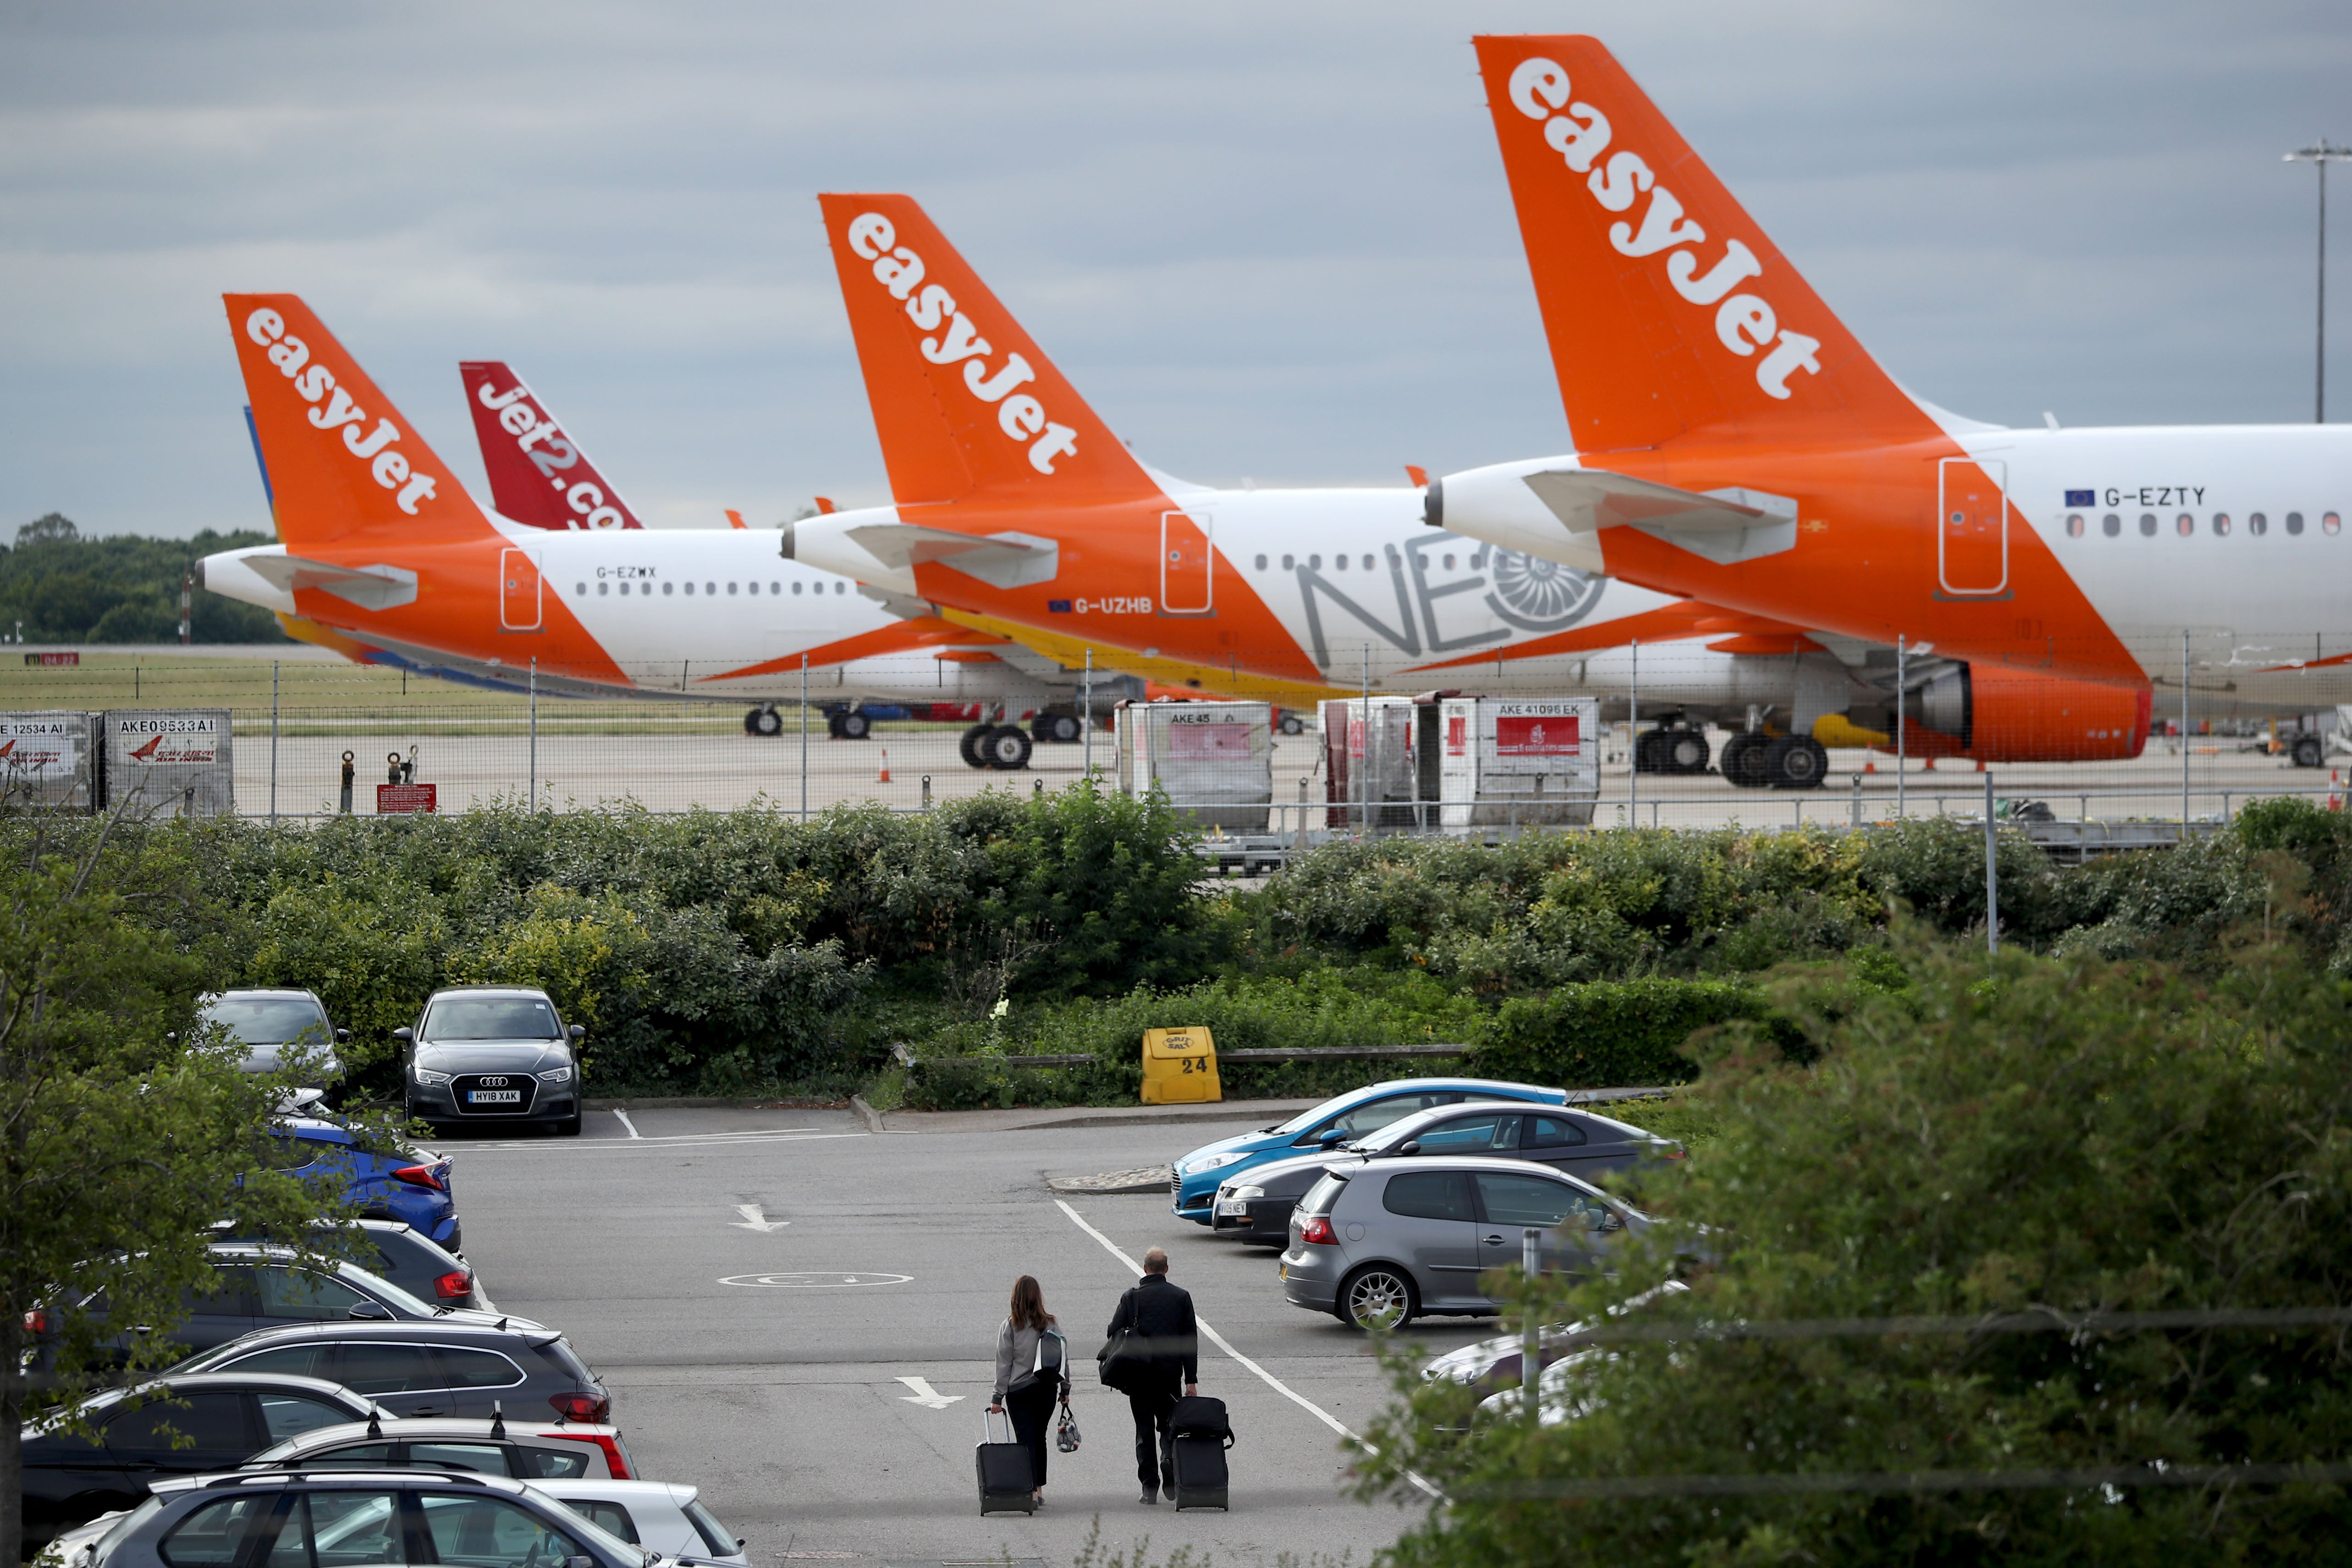 EasyJet planes at Stansted airport